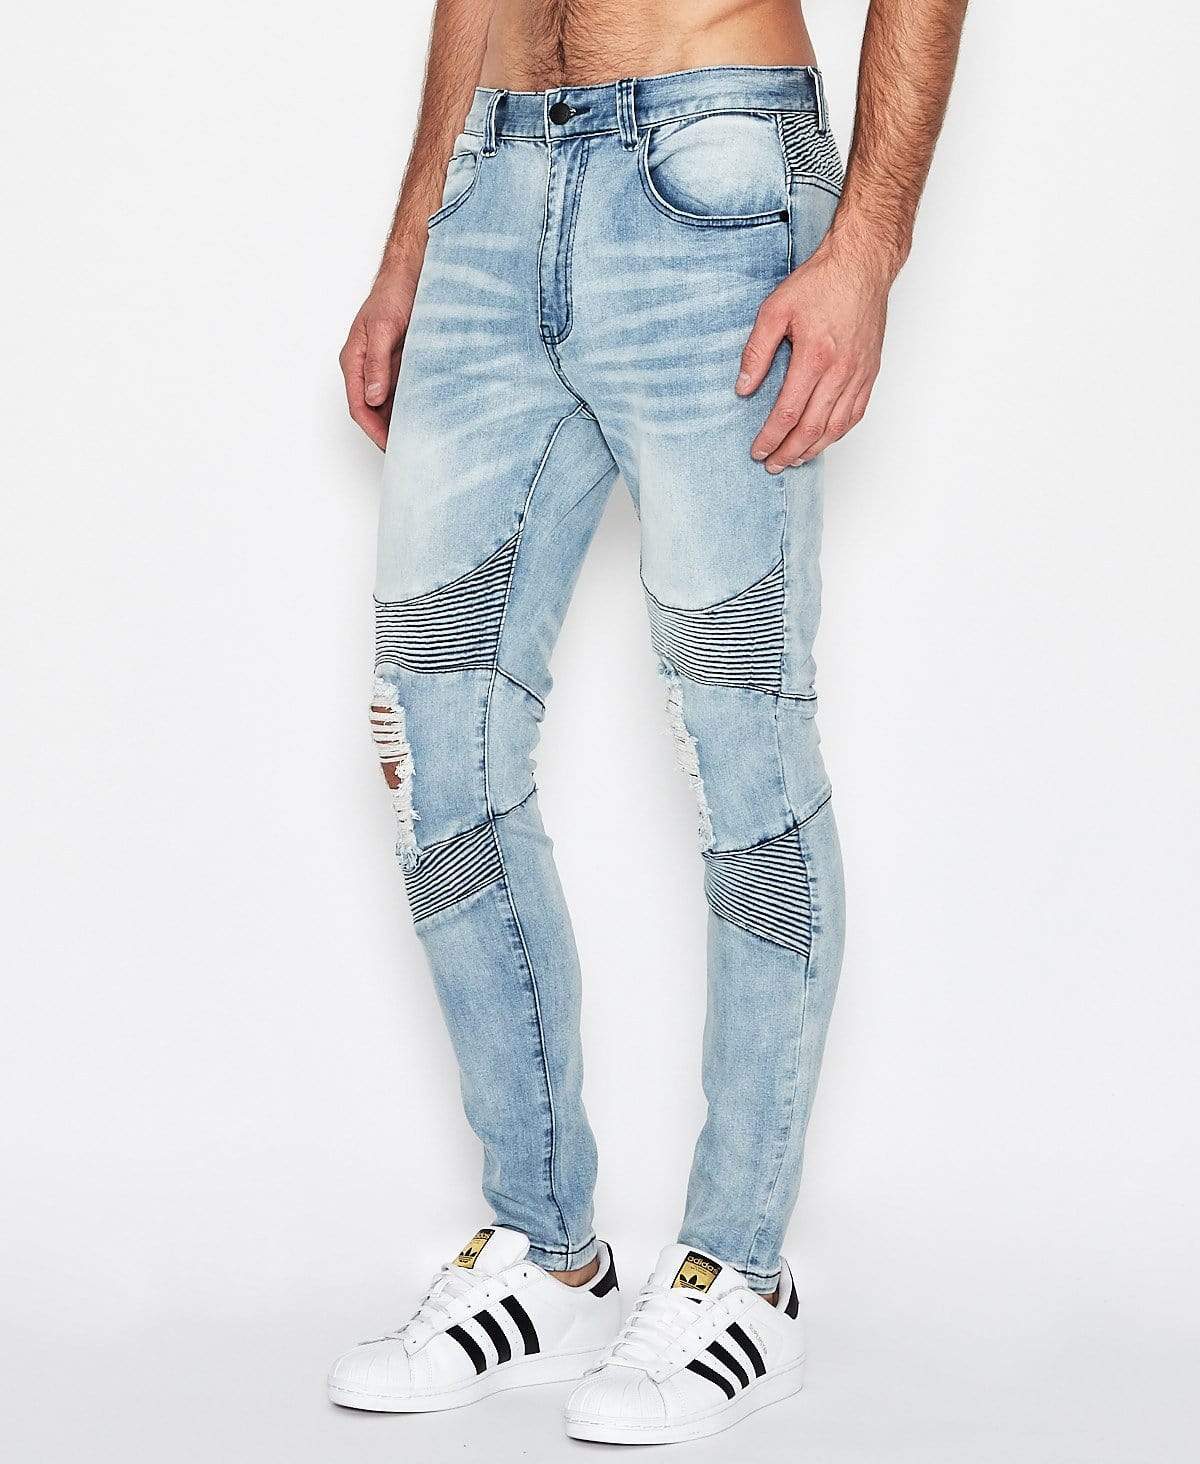 Pin on Jeans pants